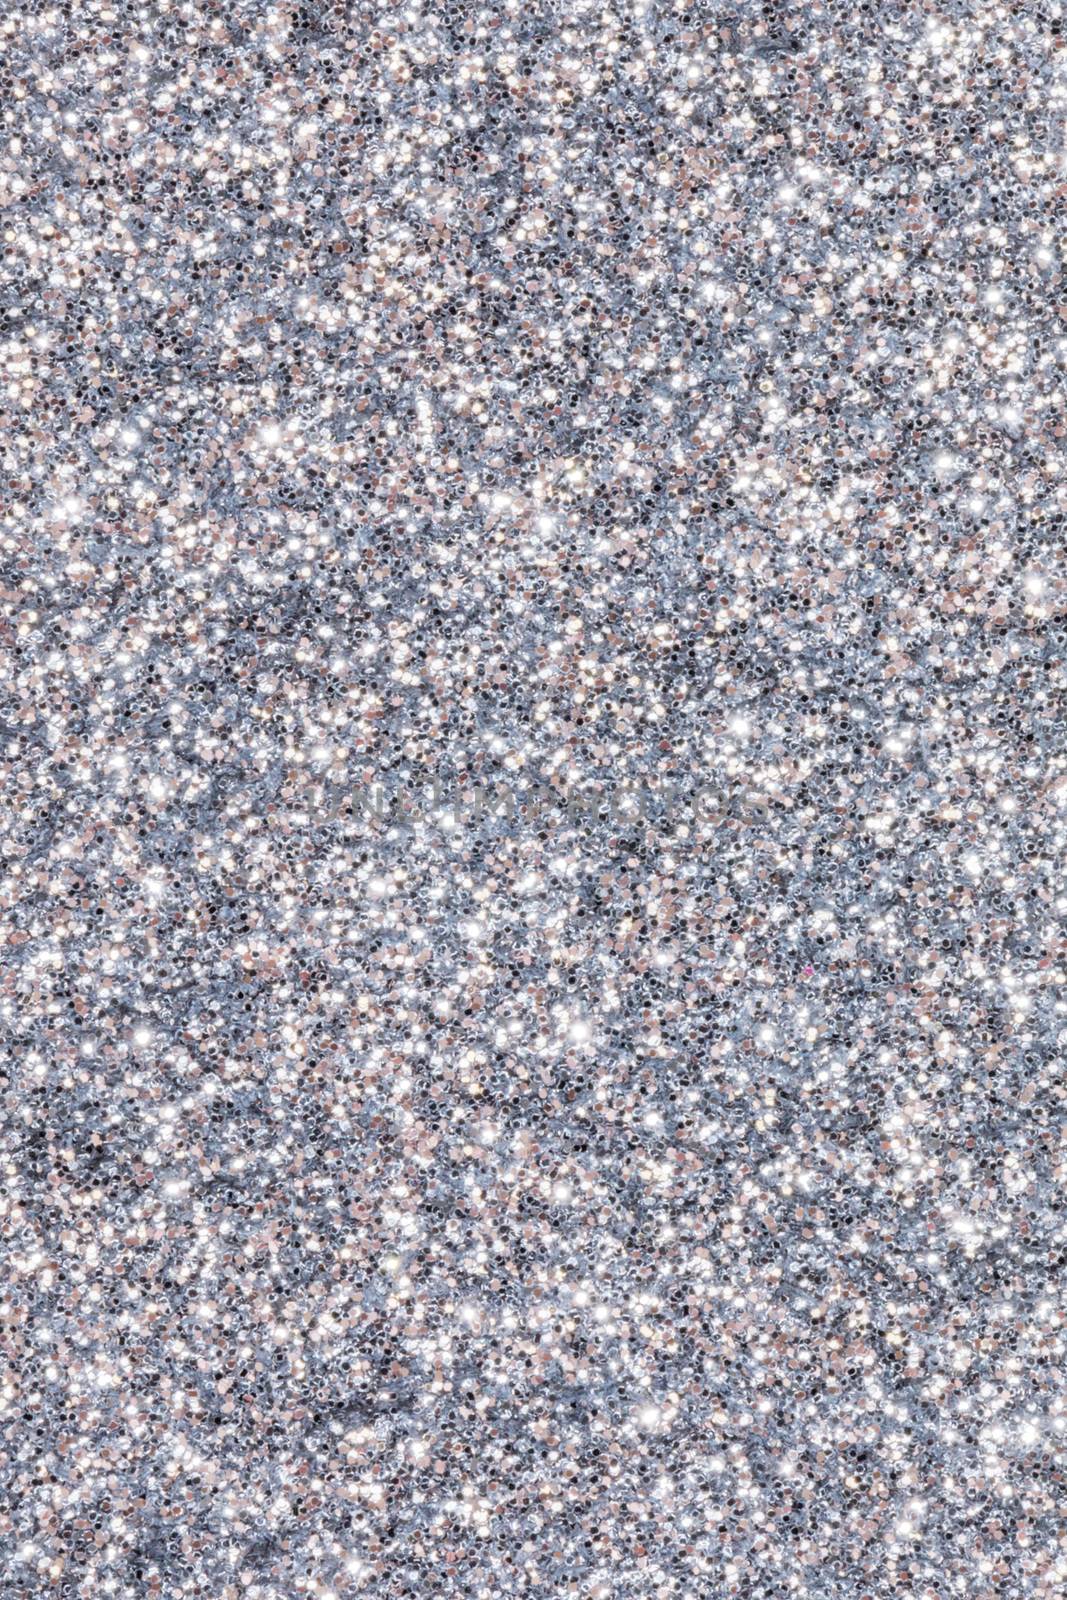 Silver glitter sparkle background by Yellowj